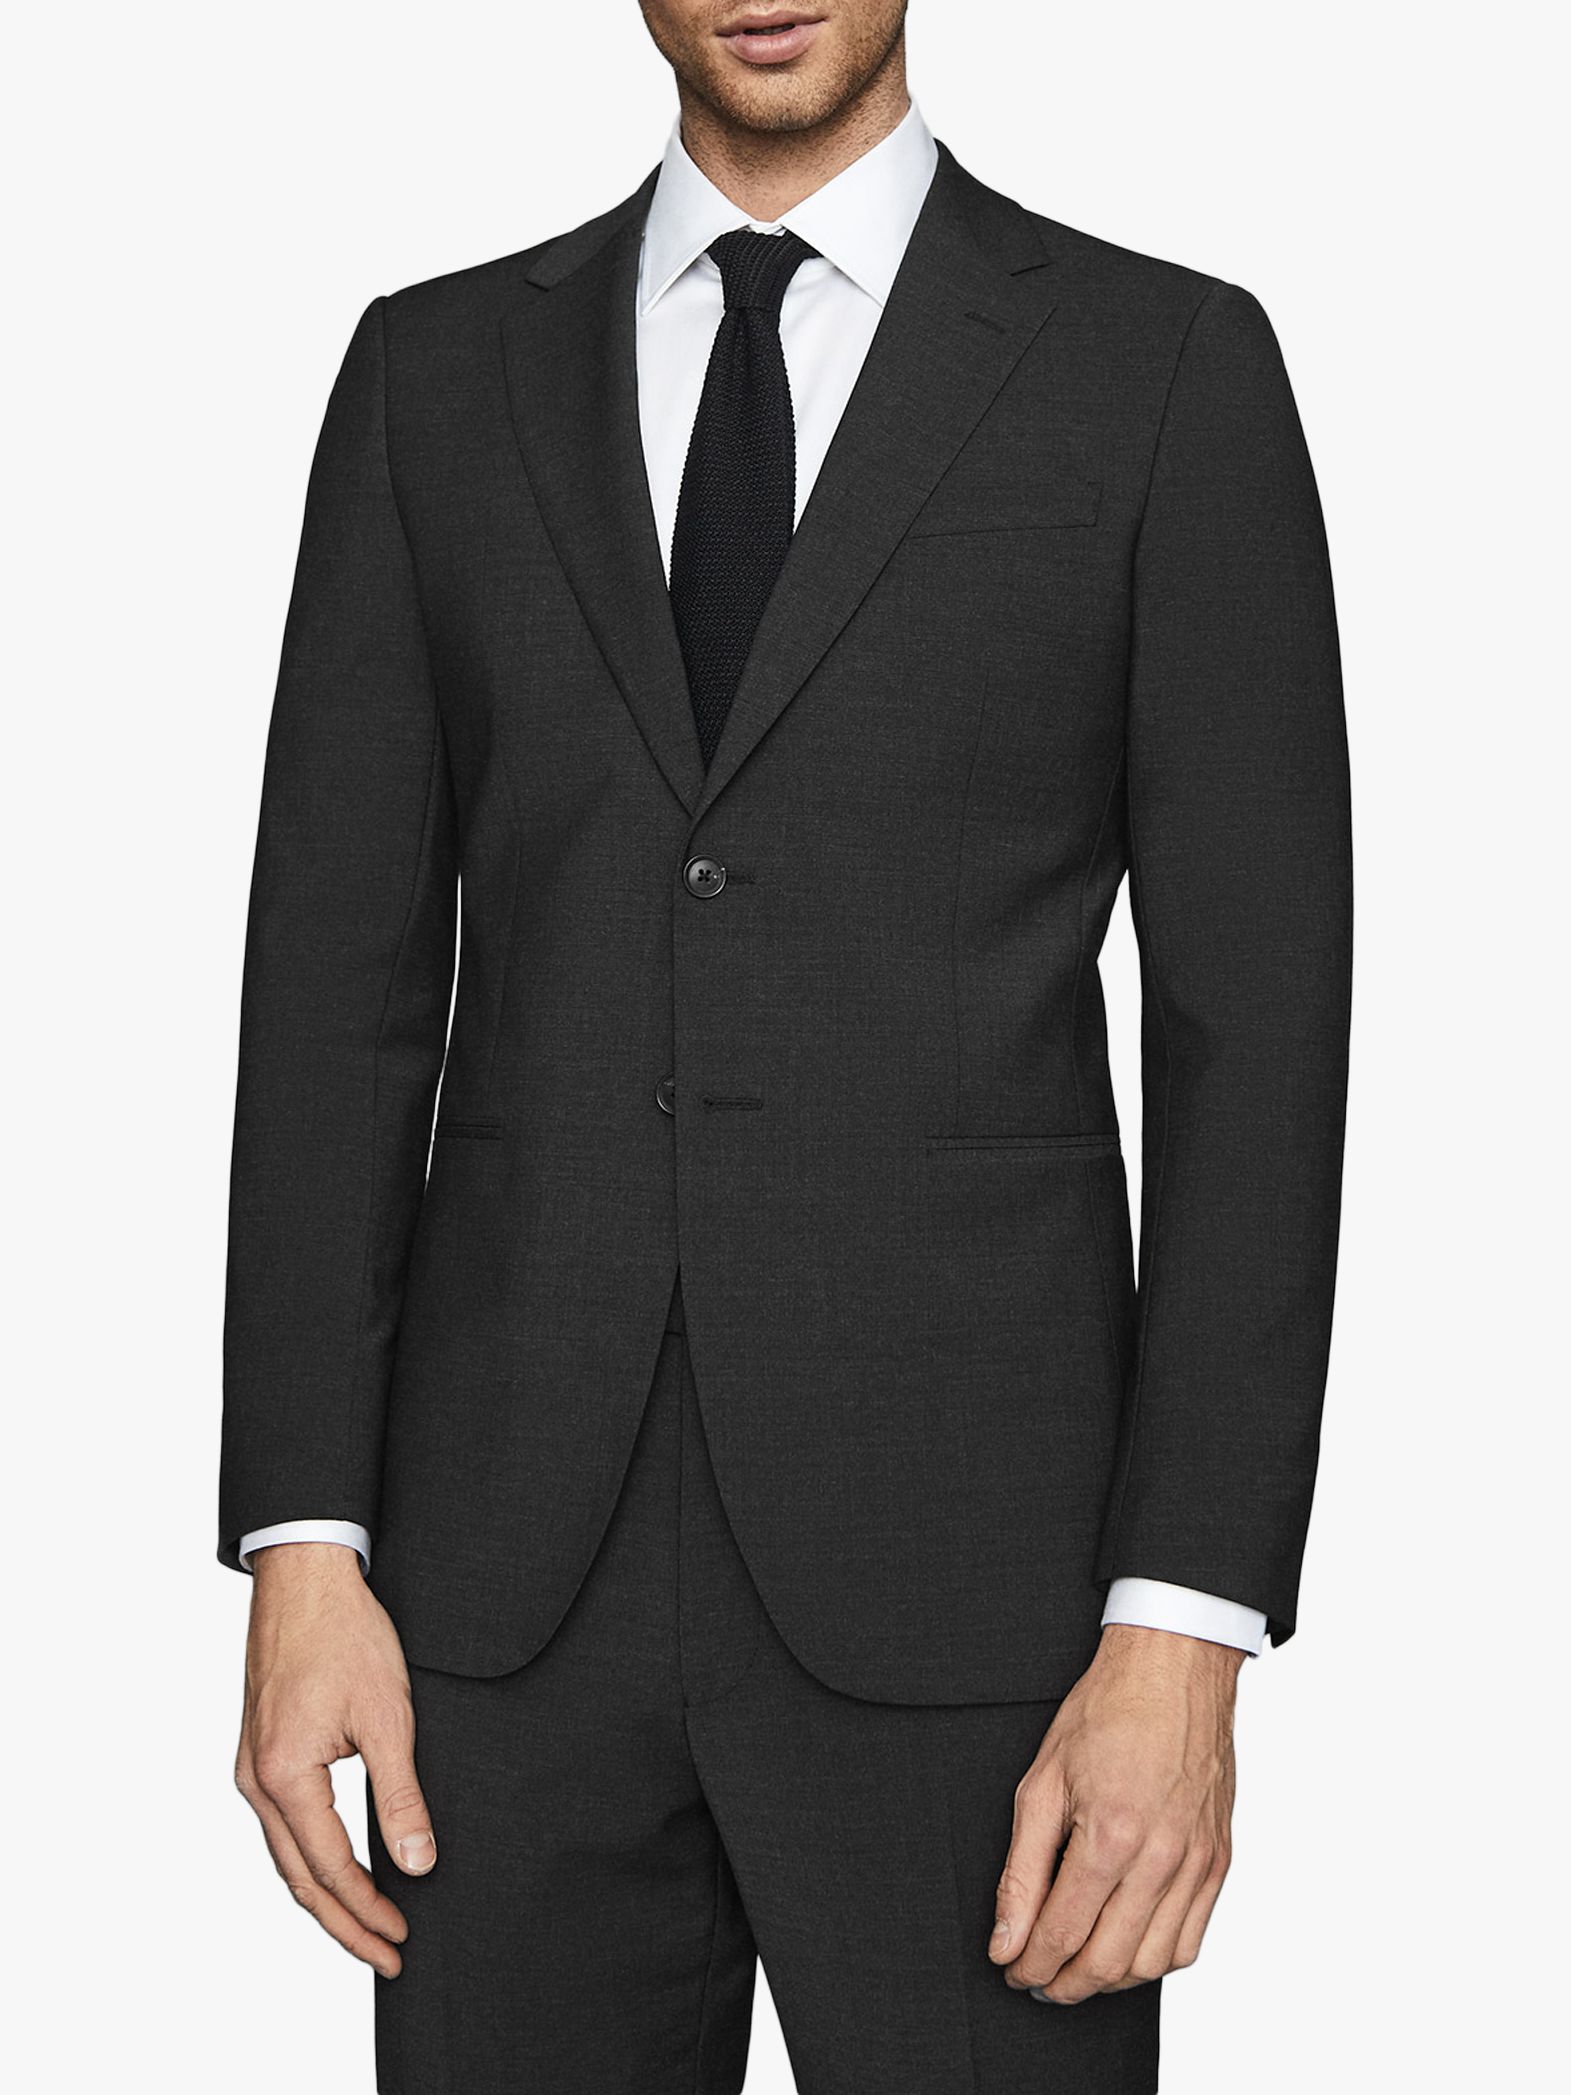 Reiss Hope Modern Fit Travel Suit Jacket, Charcoal at John Lewis & Partners